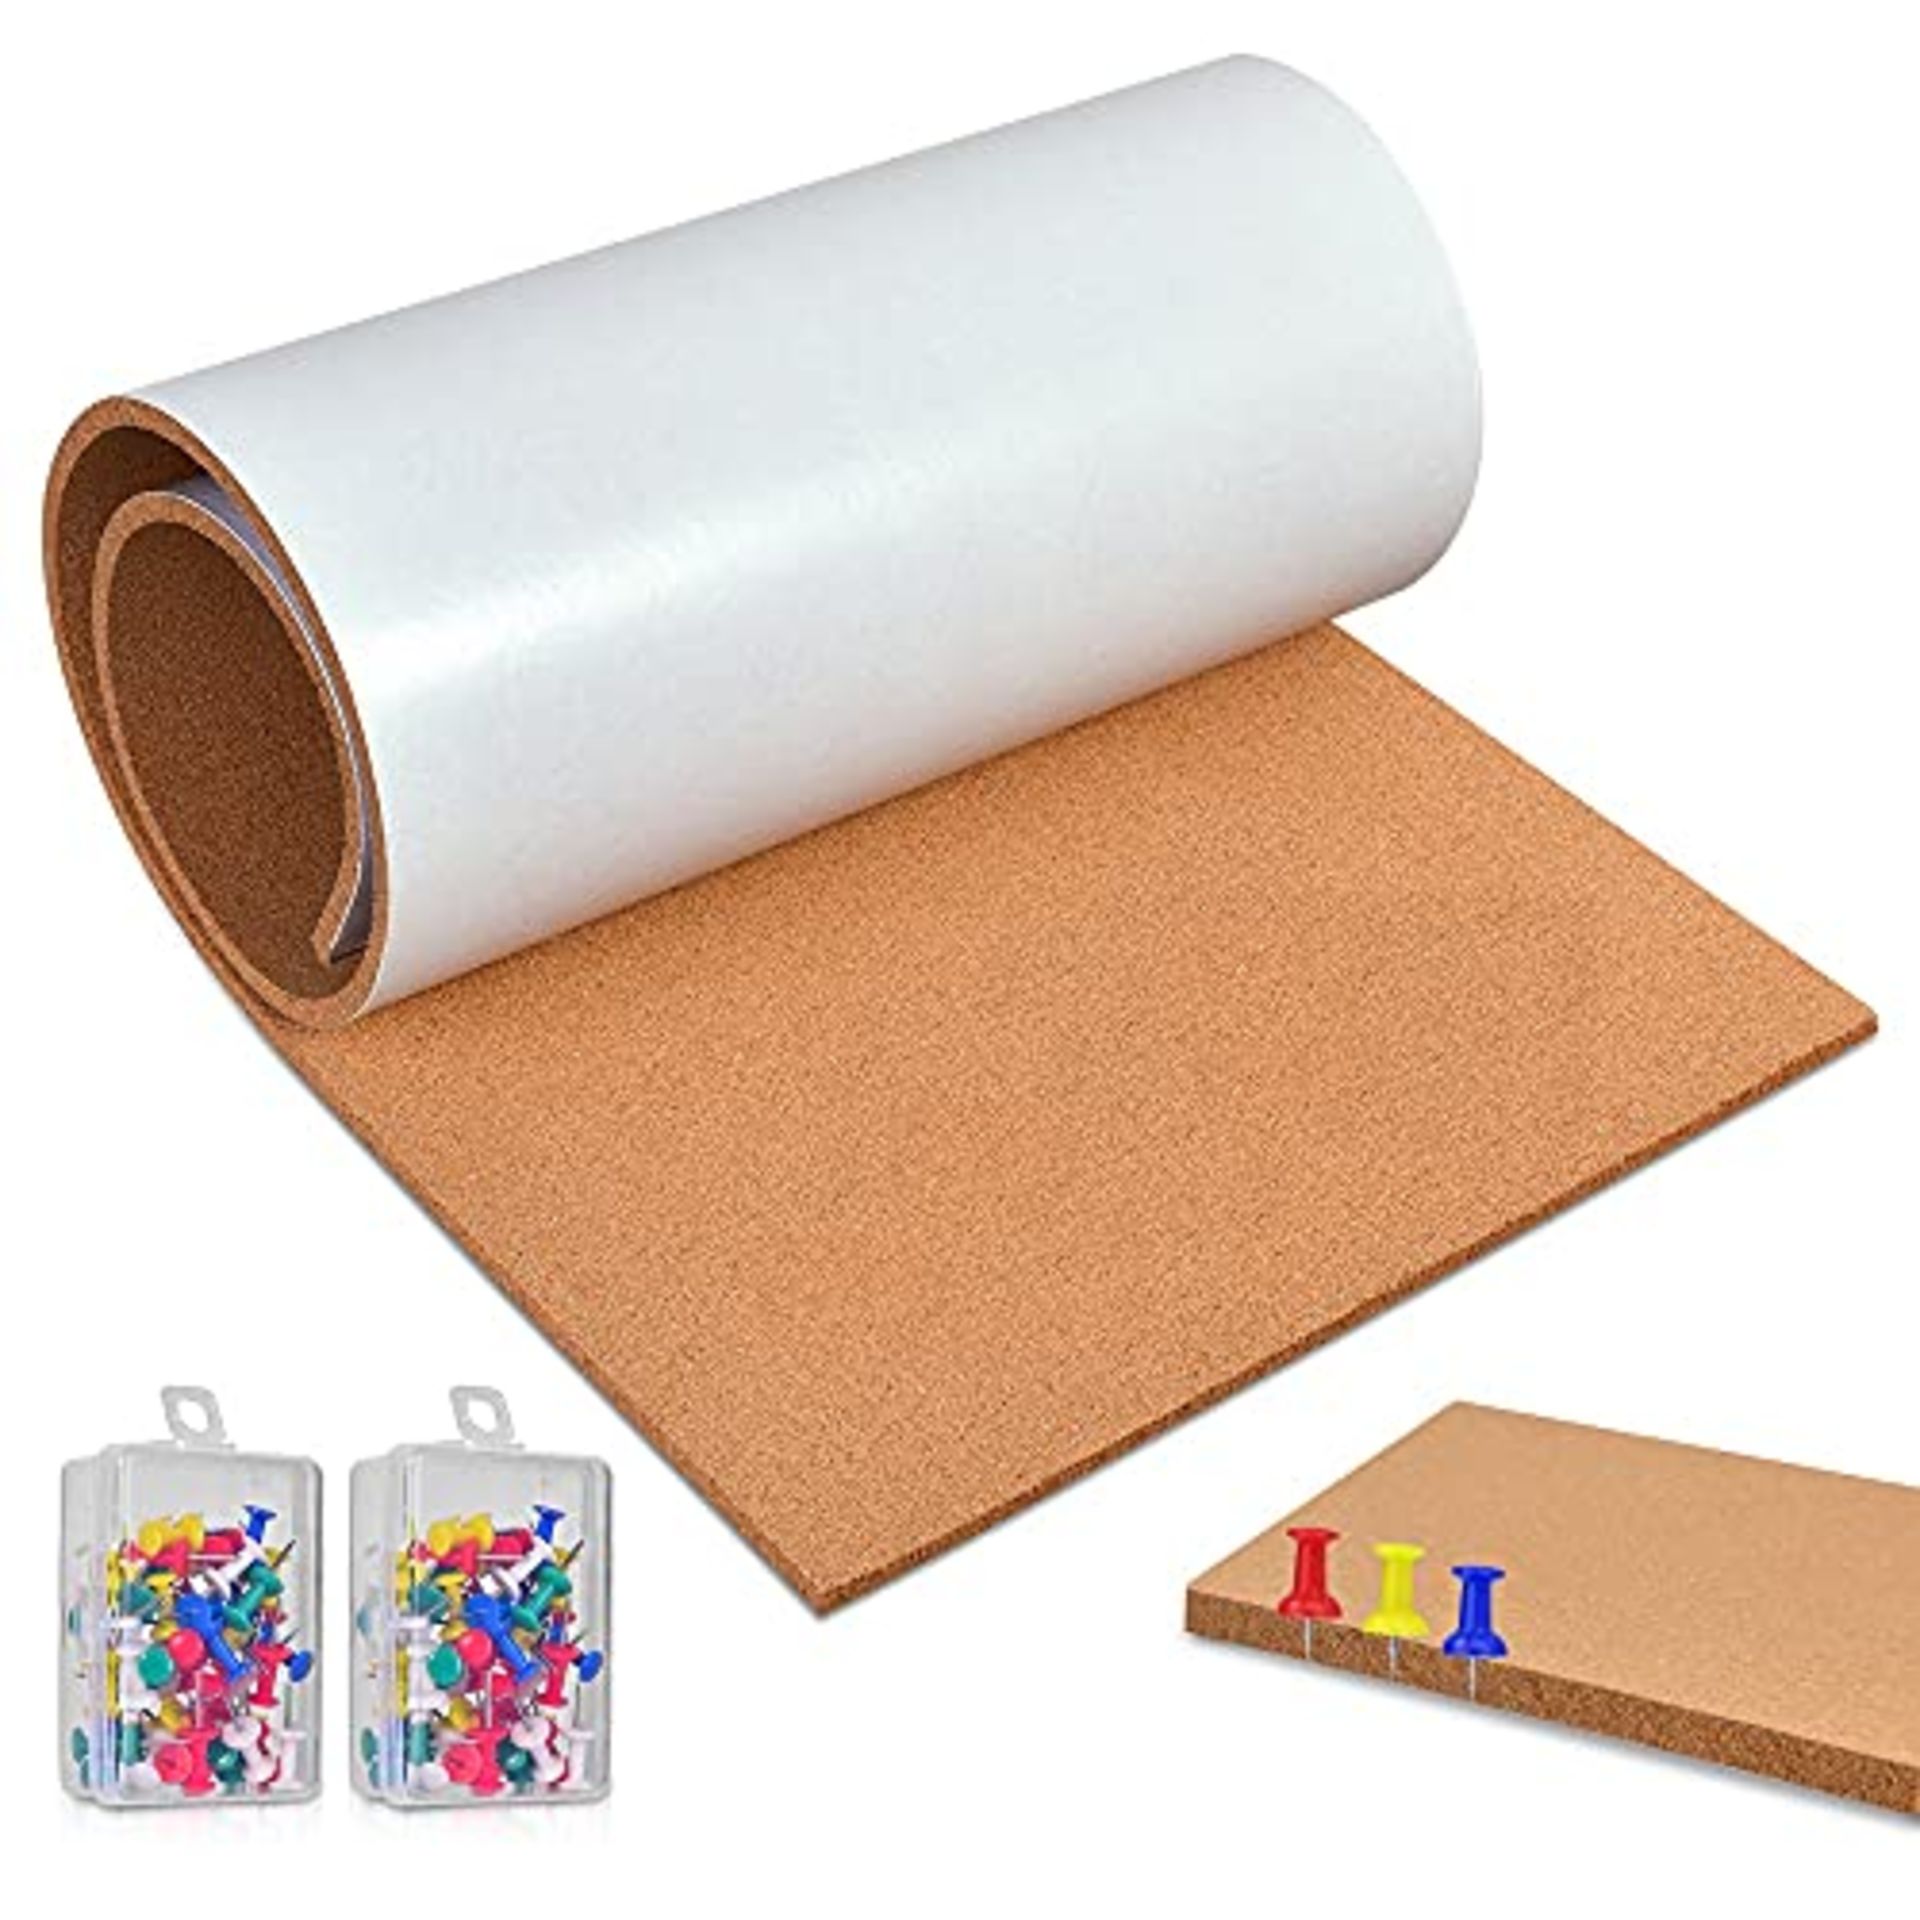 Okydoky 40x120cm Self-Adhesive Cork Borad Roll, 8mm Thick Cork Boards for Walls with 100 Push Pins,